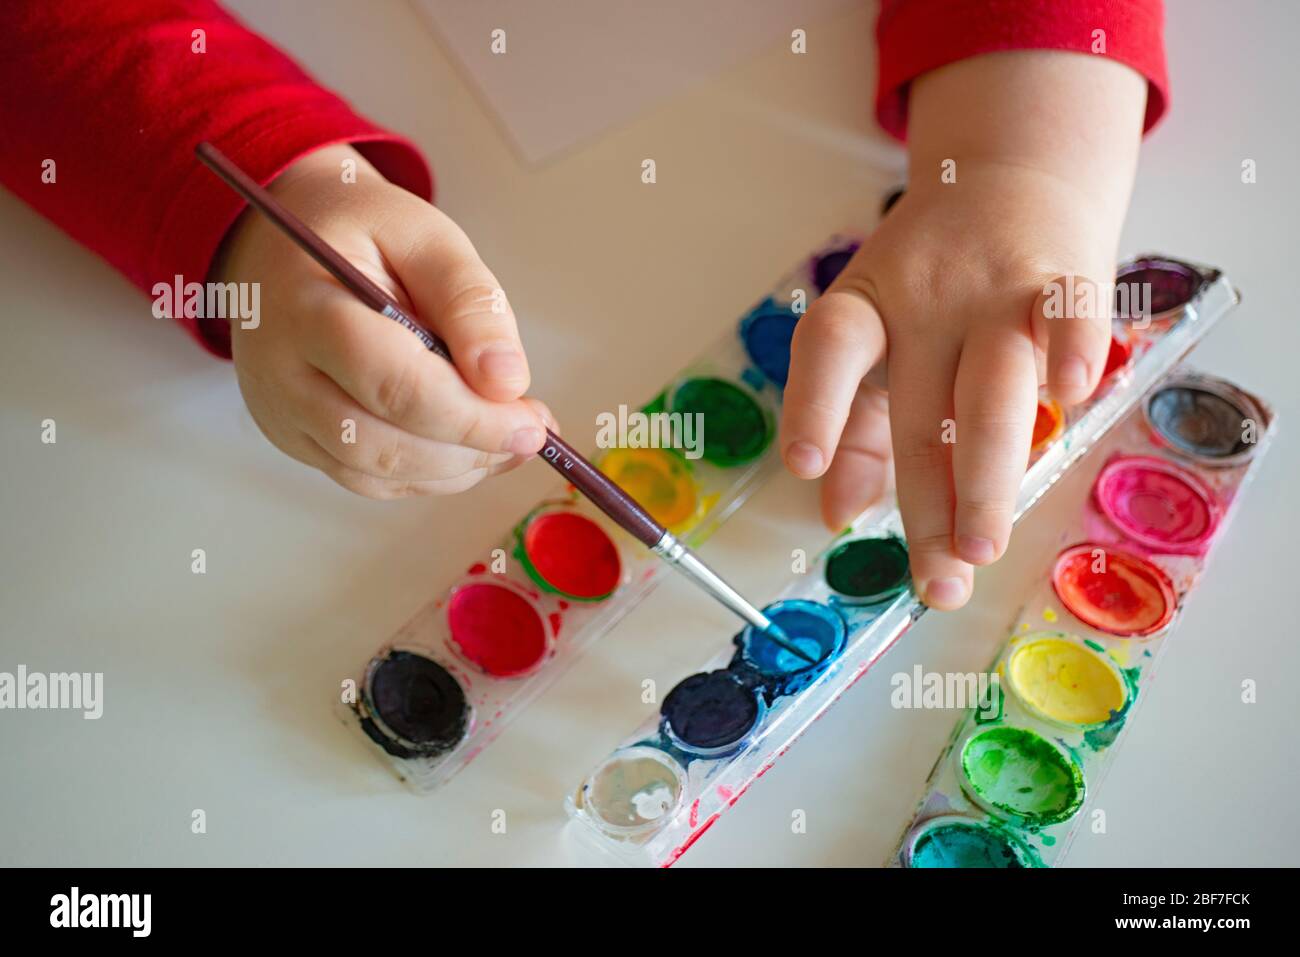 Boy Watercolor Child Painting Brush Color Palette Stock Photo